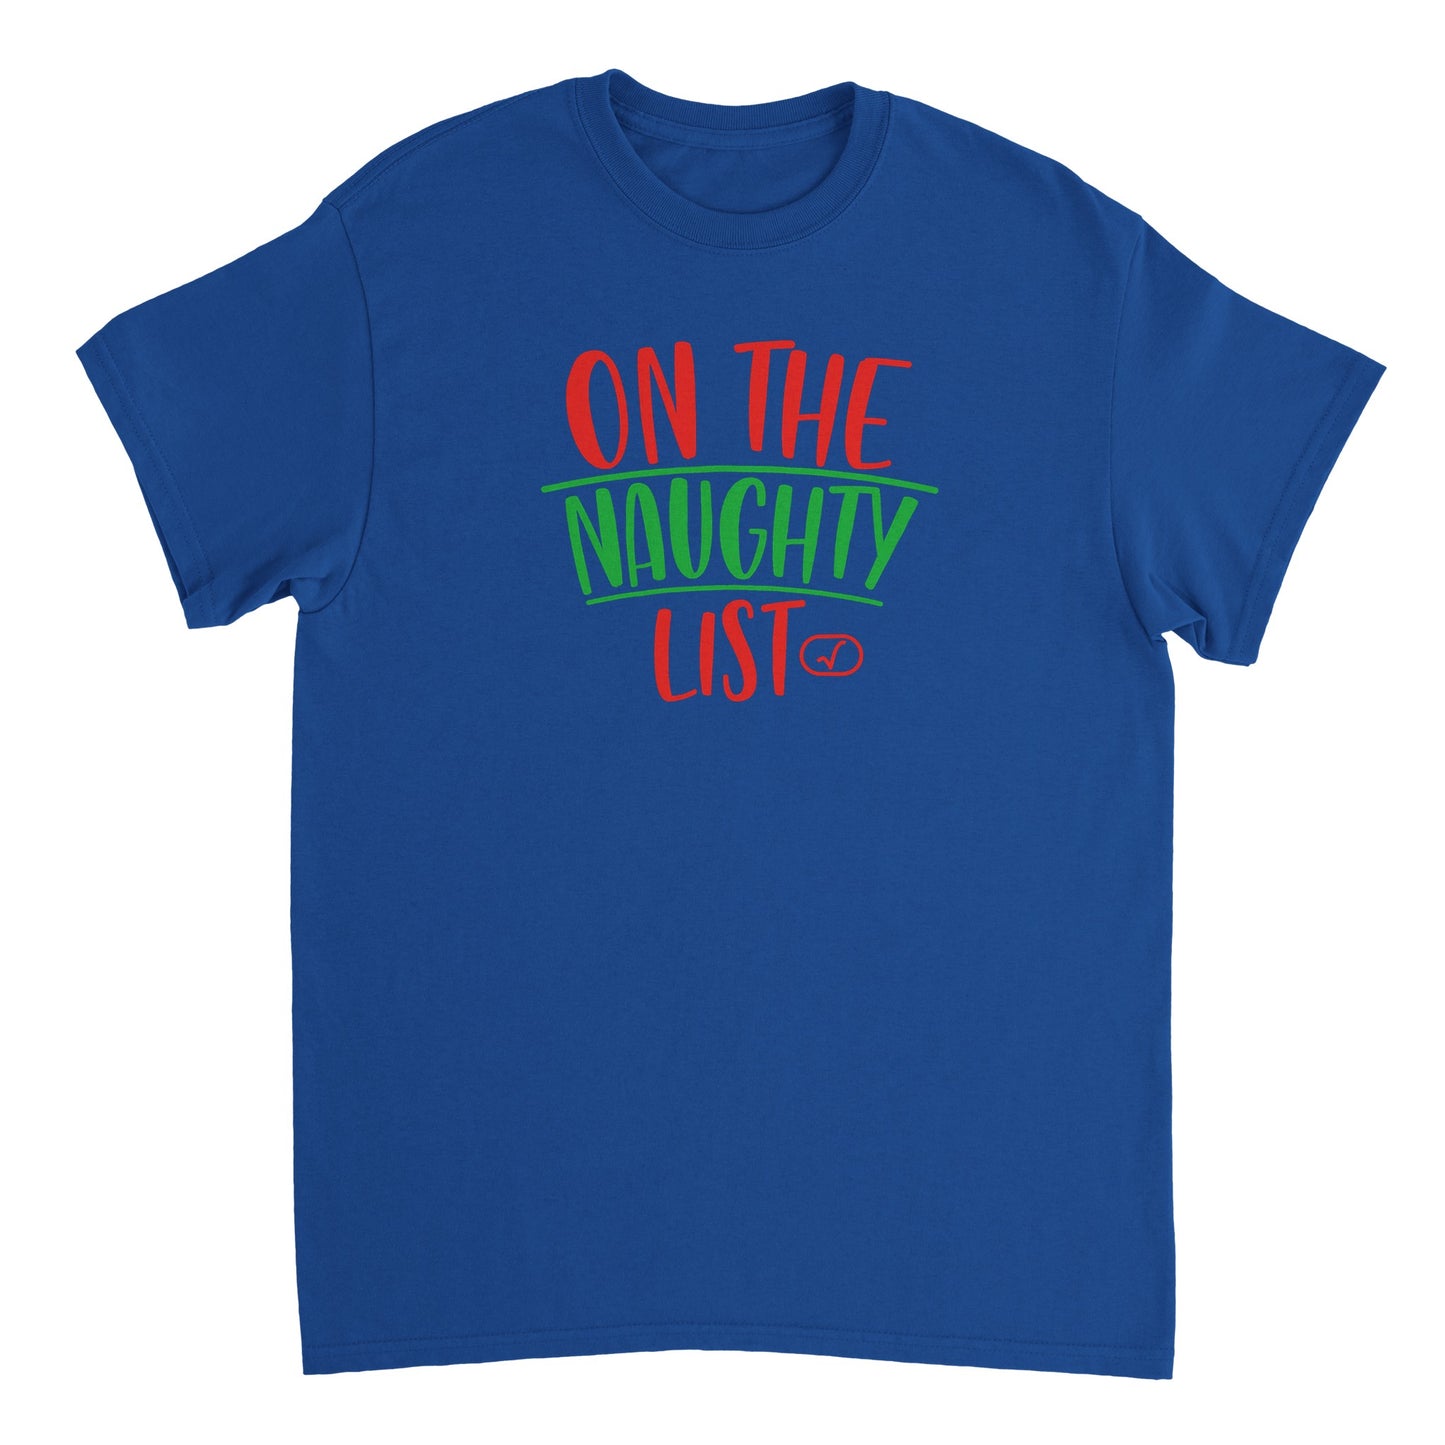 a blue t - shirt that says on the naughty list